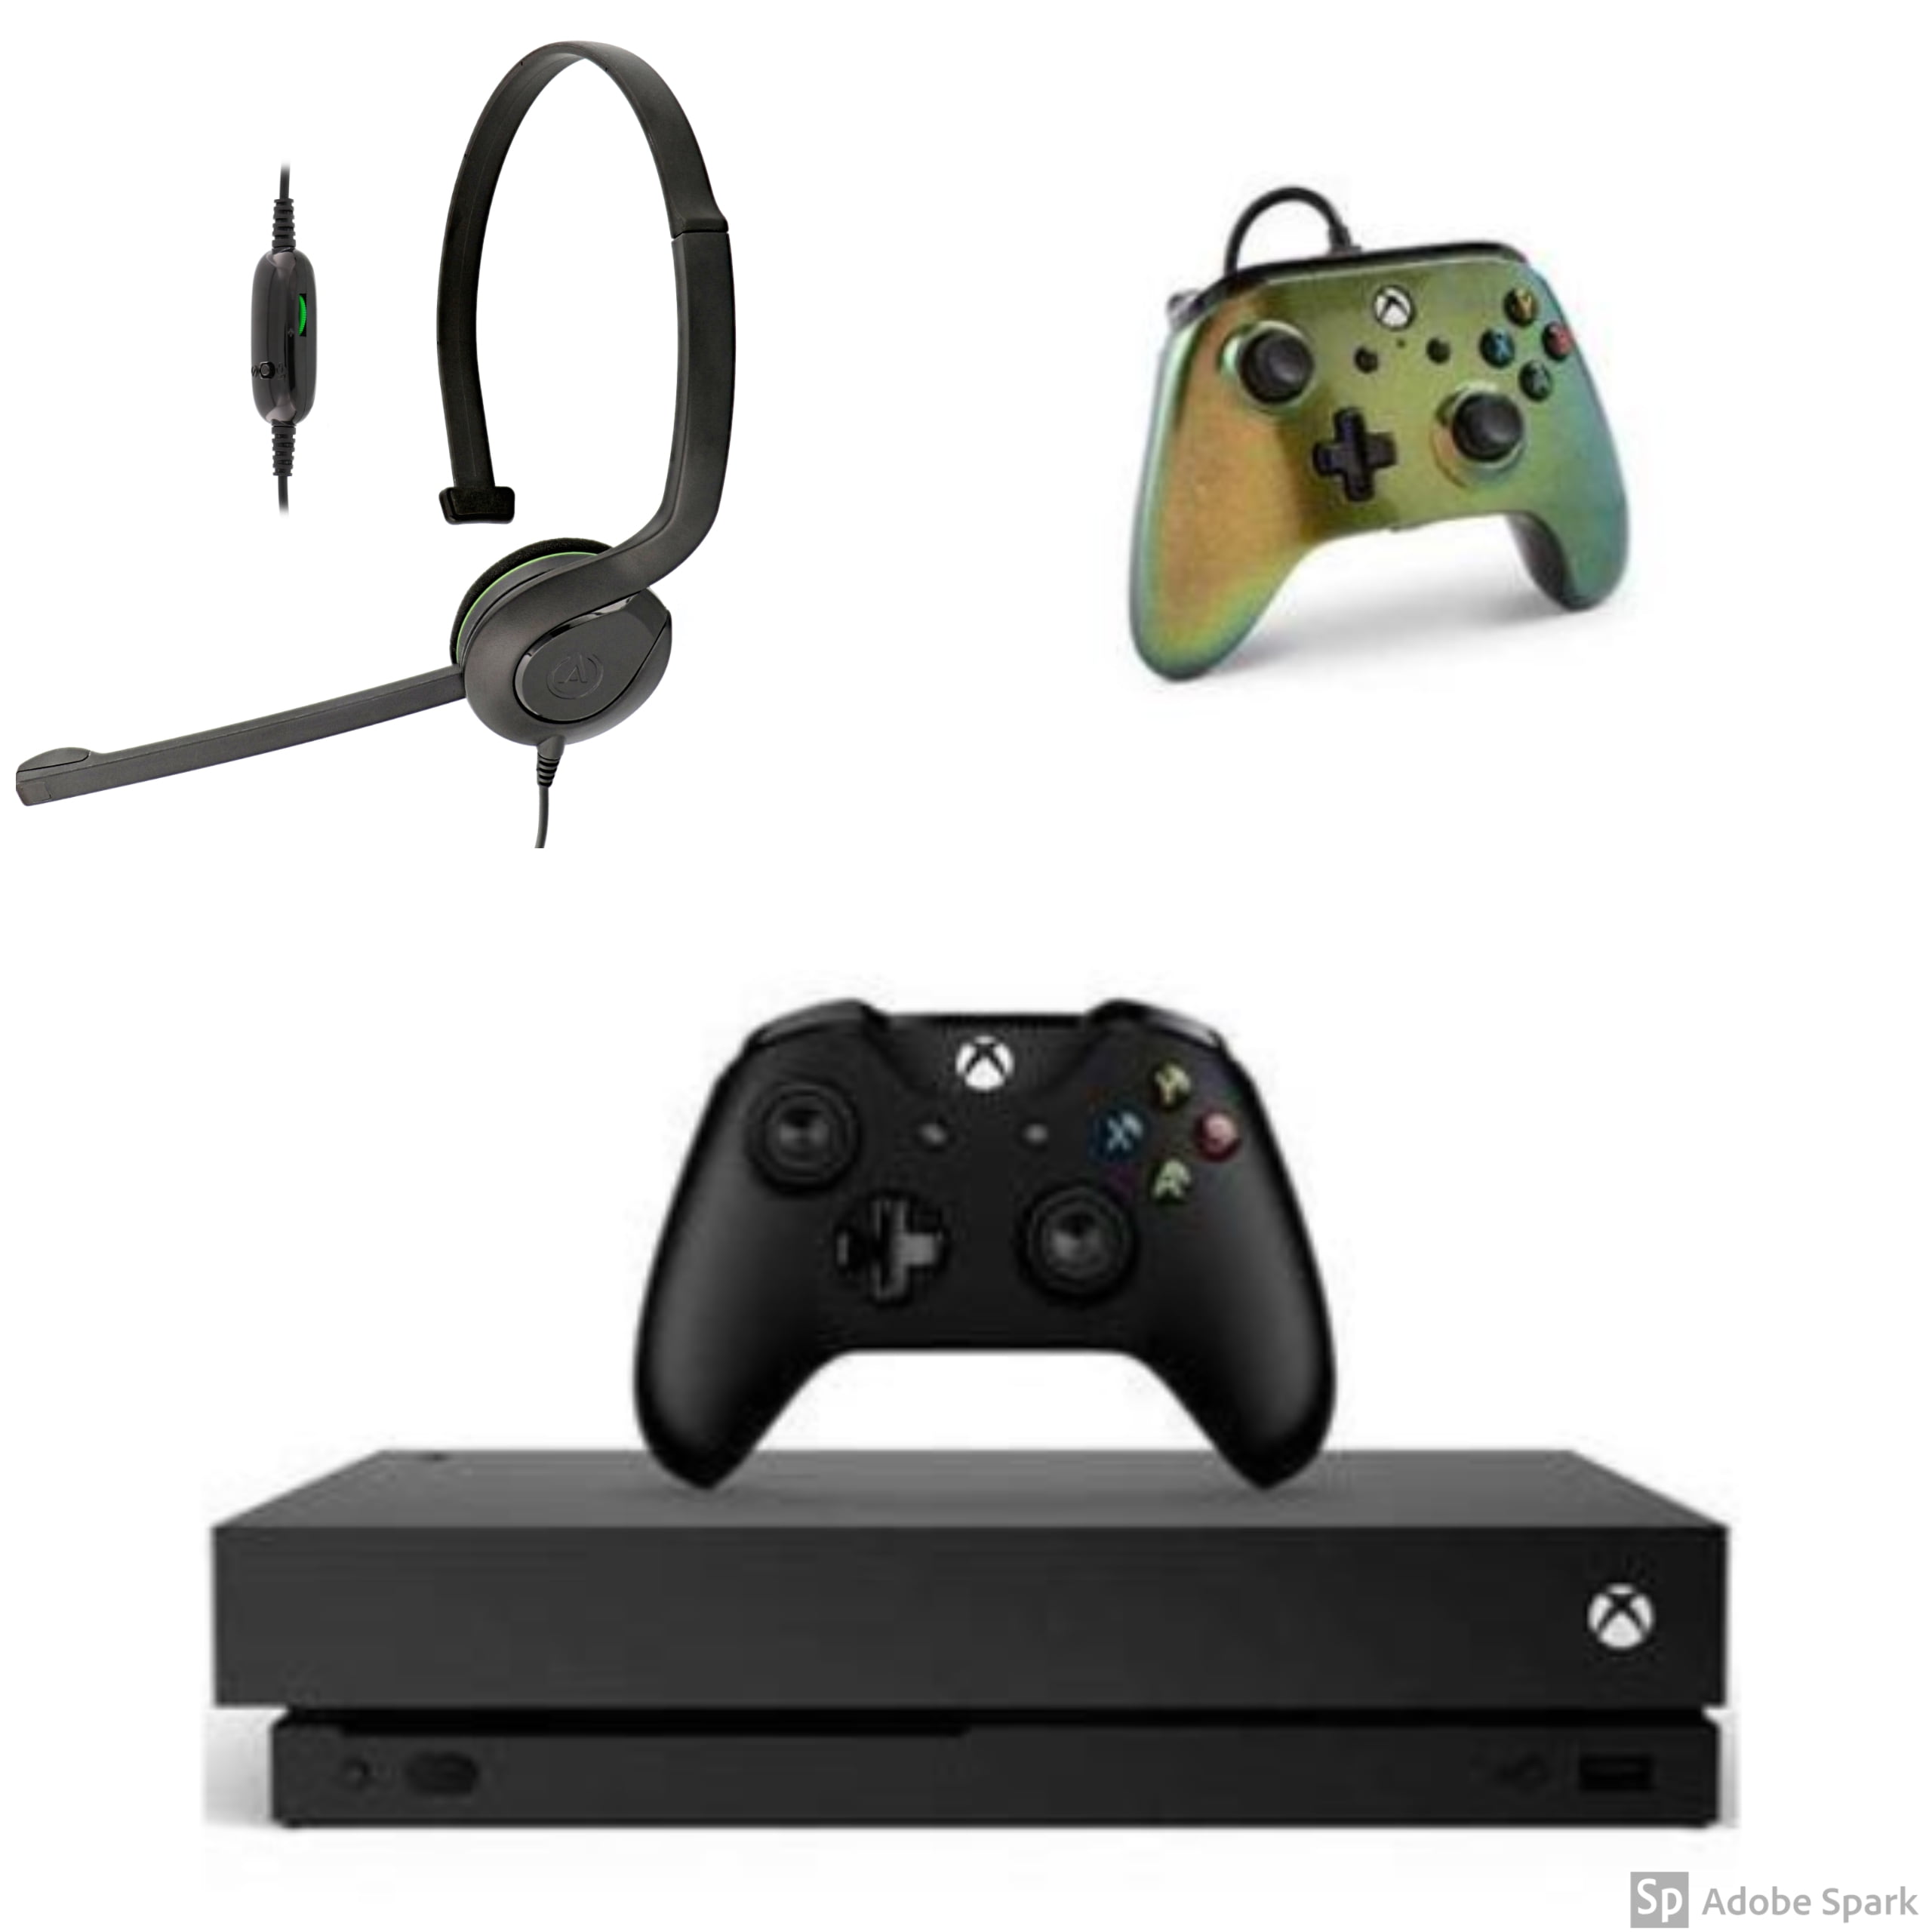 XBox 360 Console With Wireless Controller And Headset Including